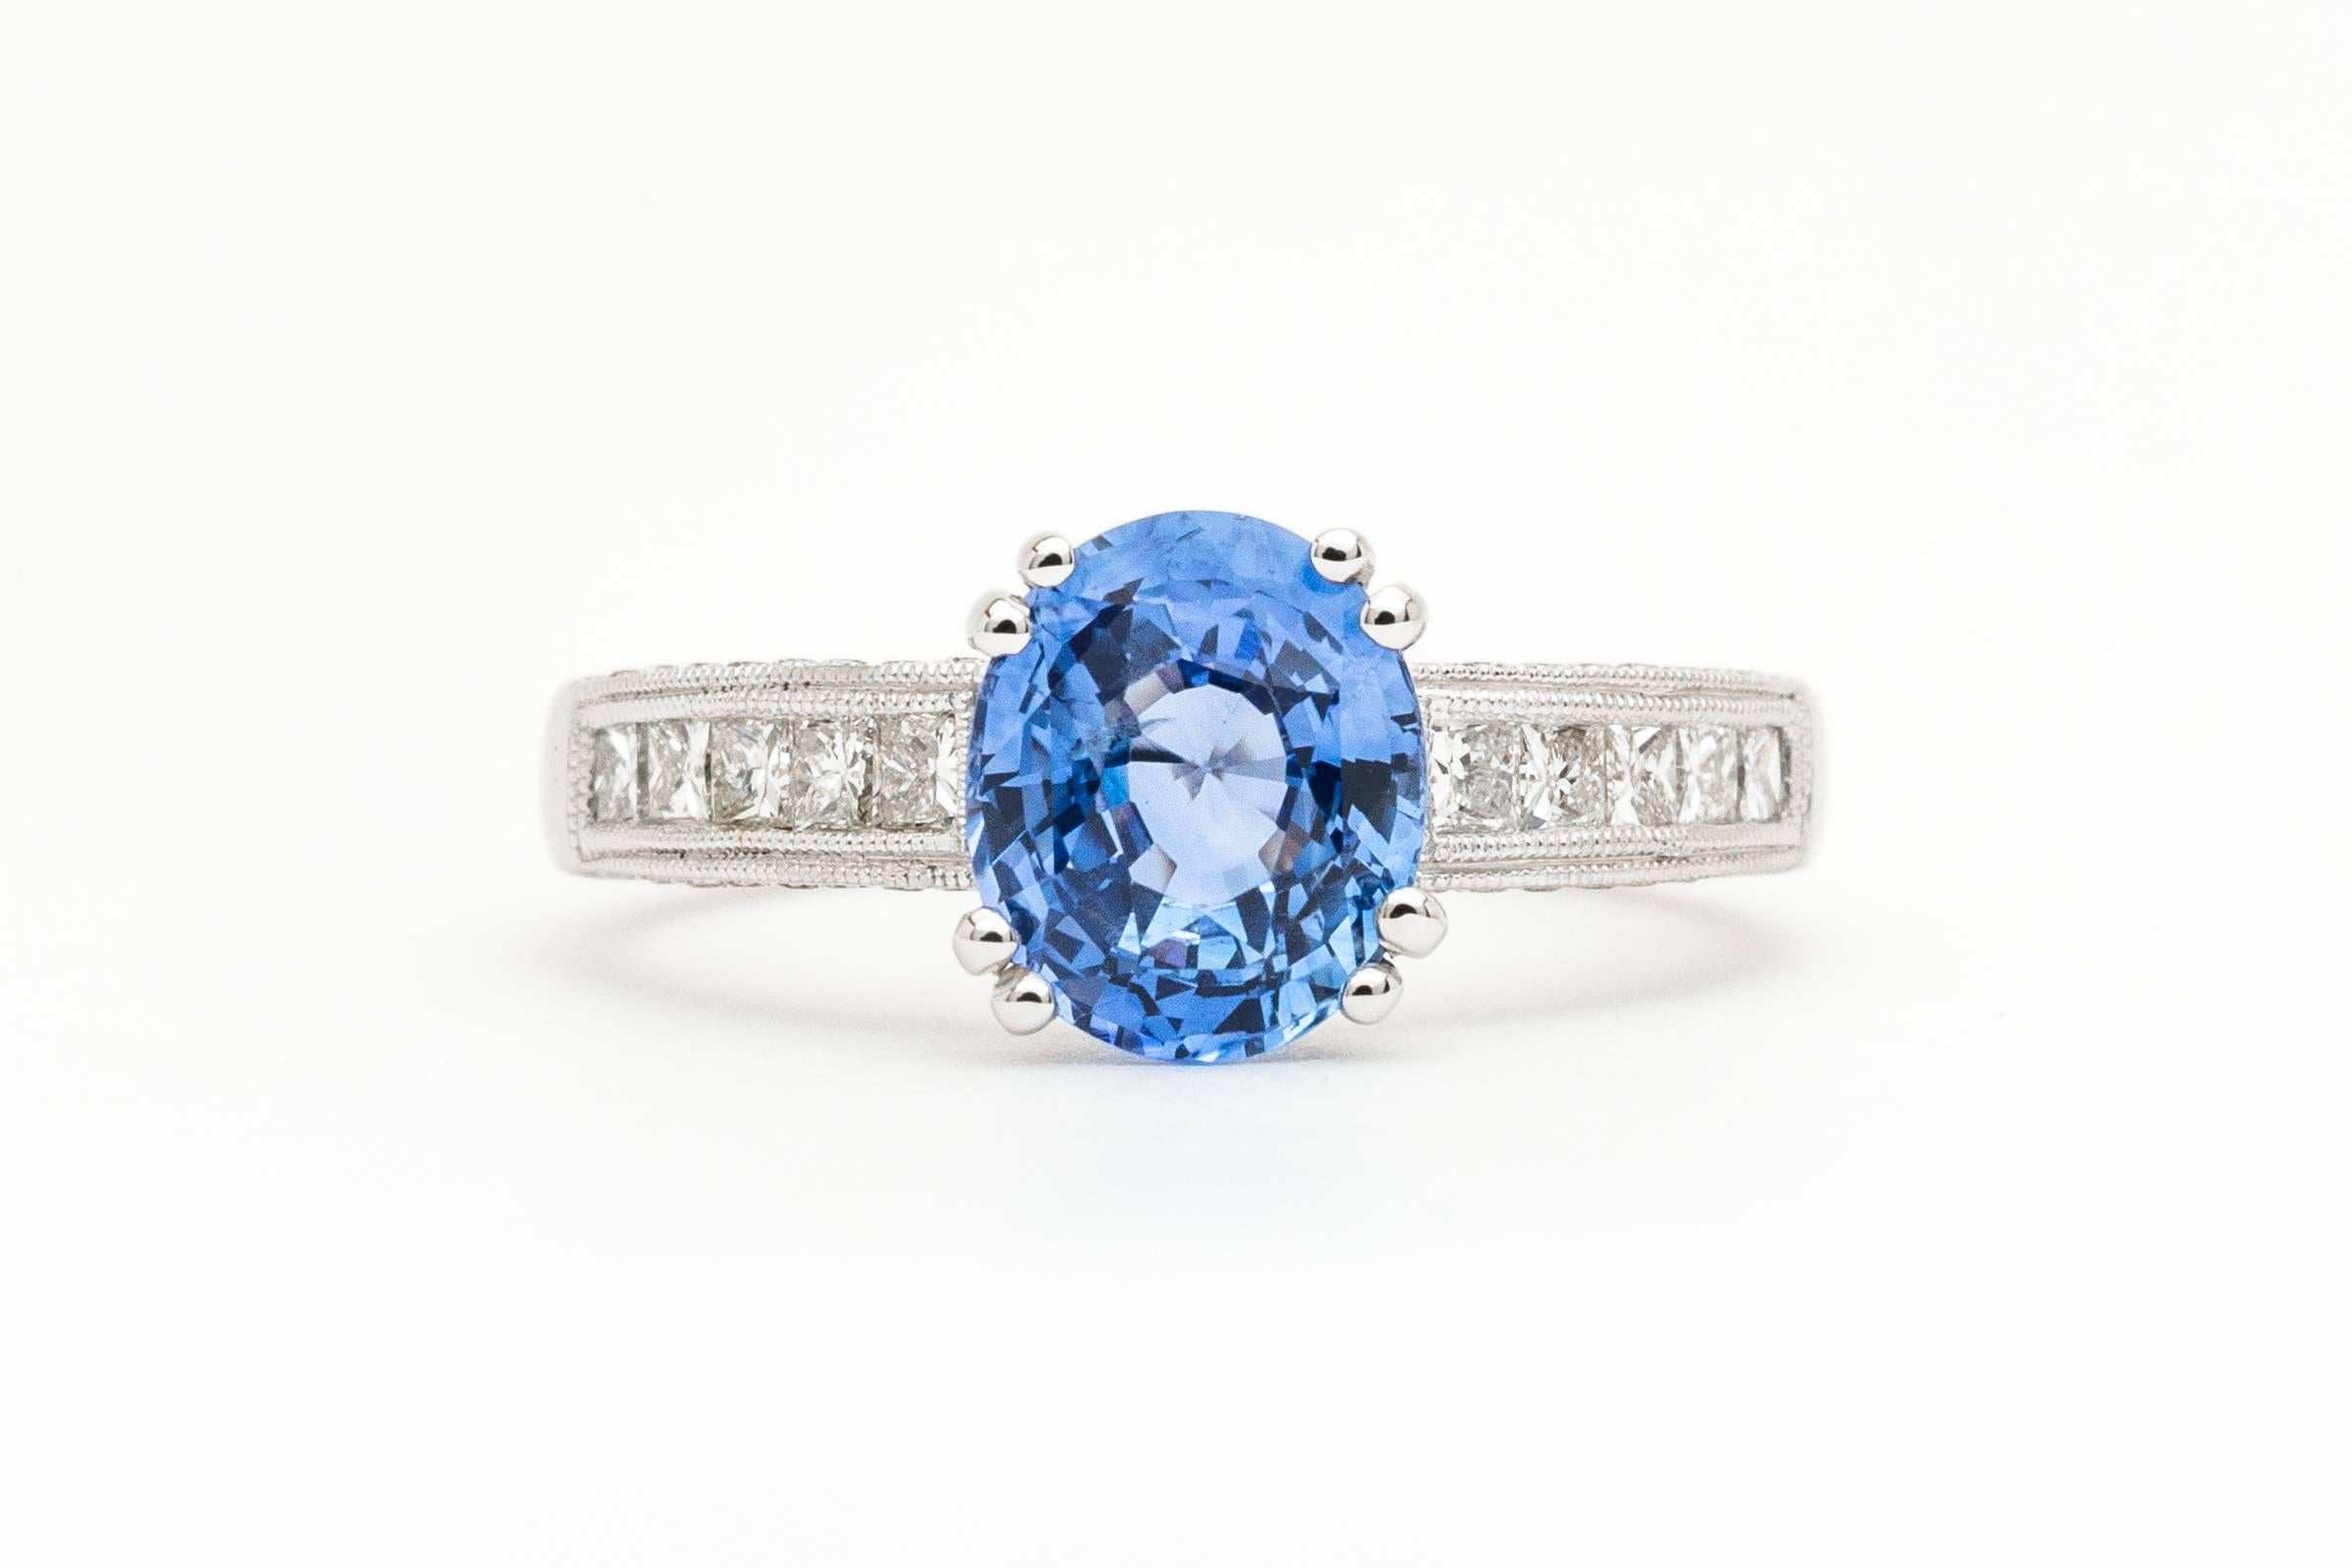 A beautiful ceylon sapphire and diamond ring in luxurious 18 karat white gold. Centered by a very high quality beautiful vivid blue 2.21 carat Ceylon sapphire this ring features accenting diamonds throughout in a high quality hand crafted